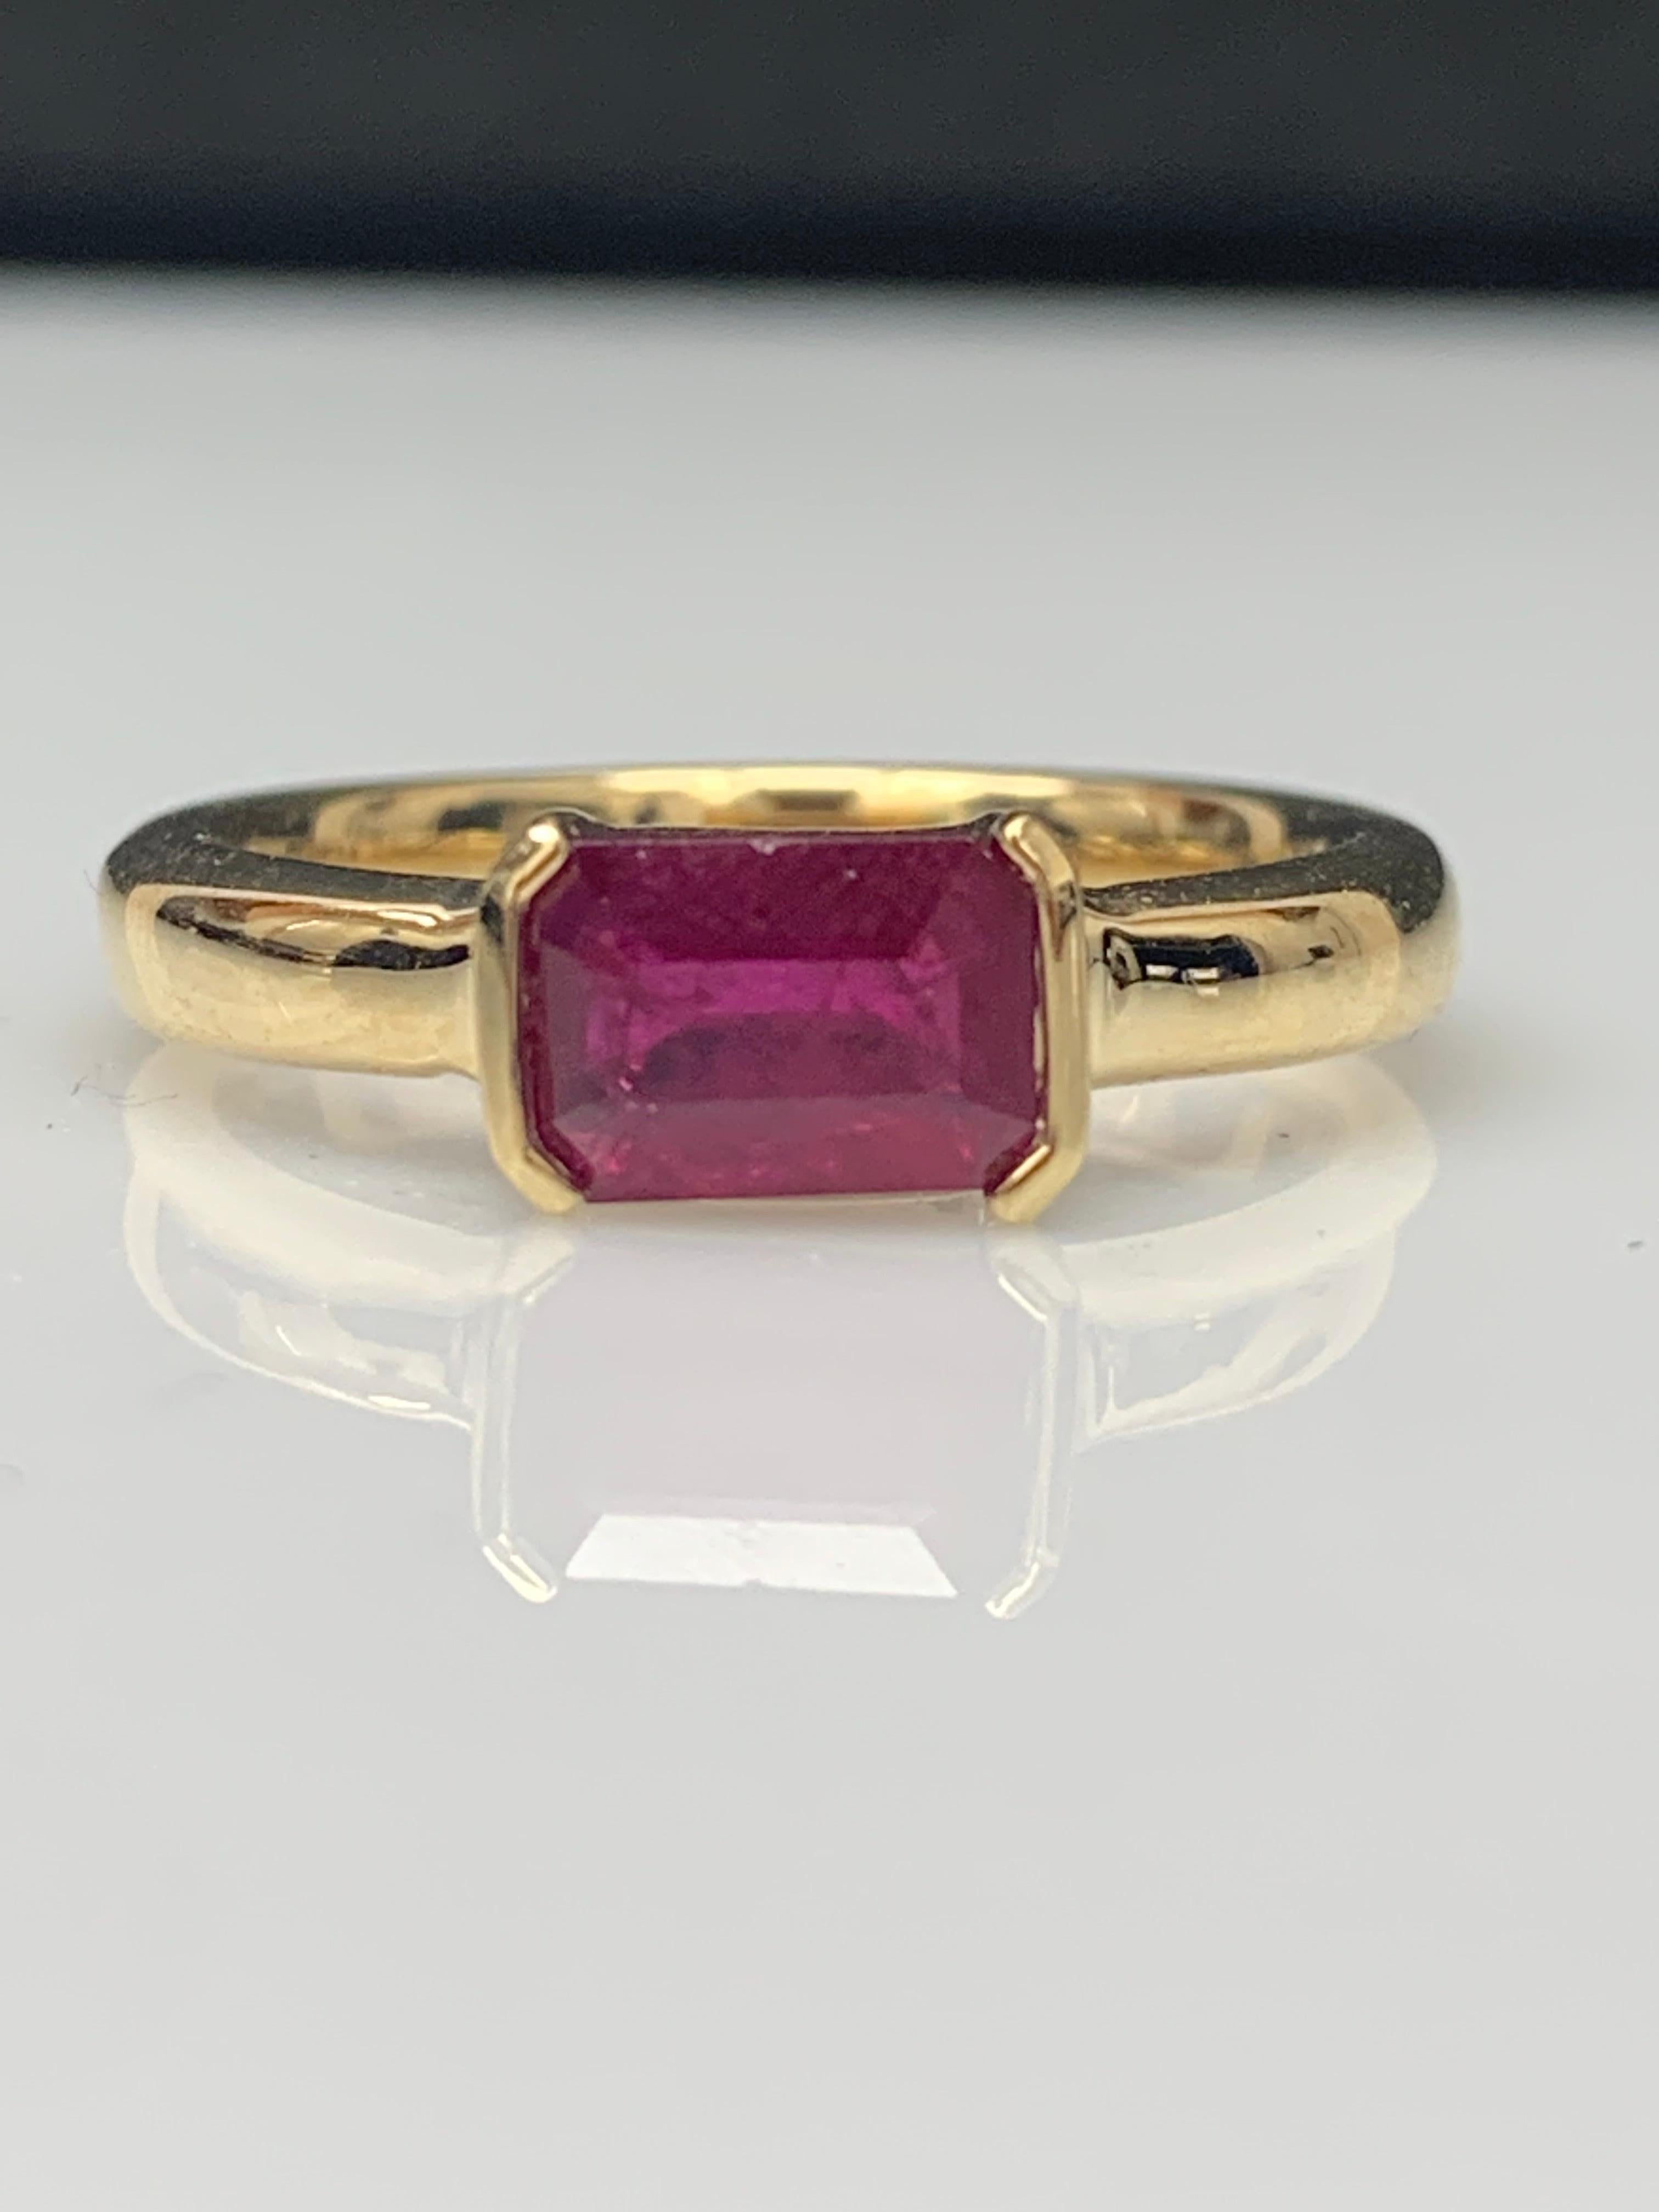 1.06 Carat Emerald Cut Ruby Band Ring in 14K Yellow Gold For Sale 4